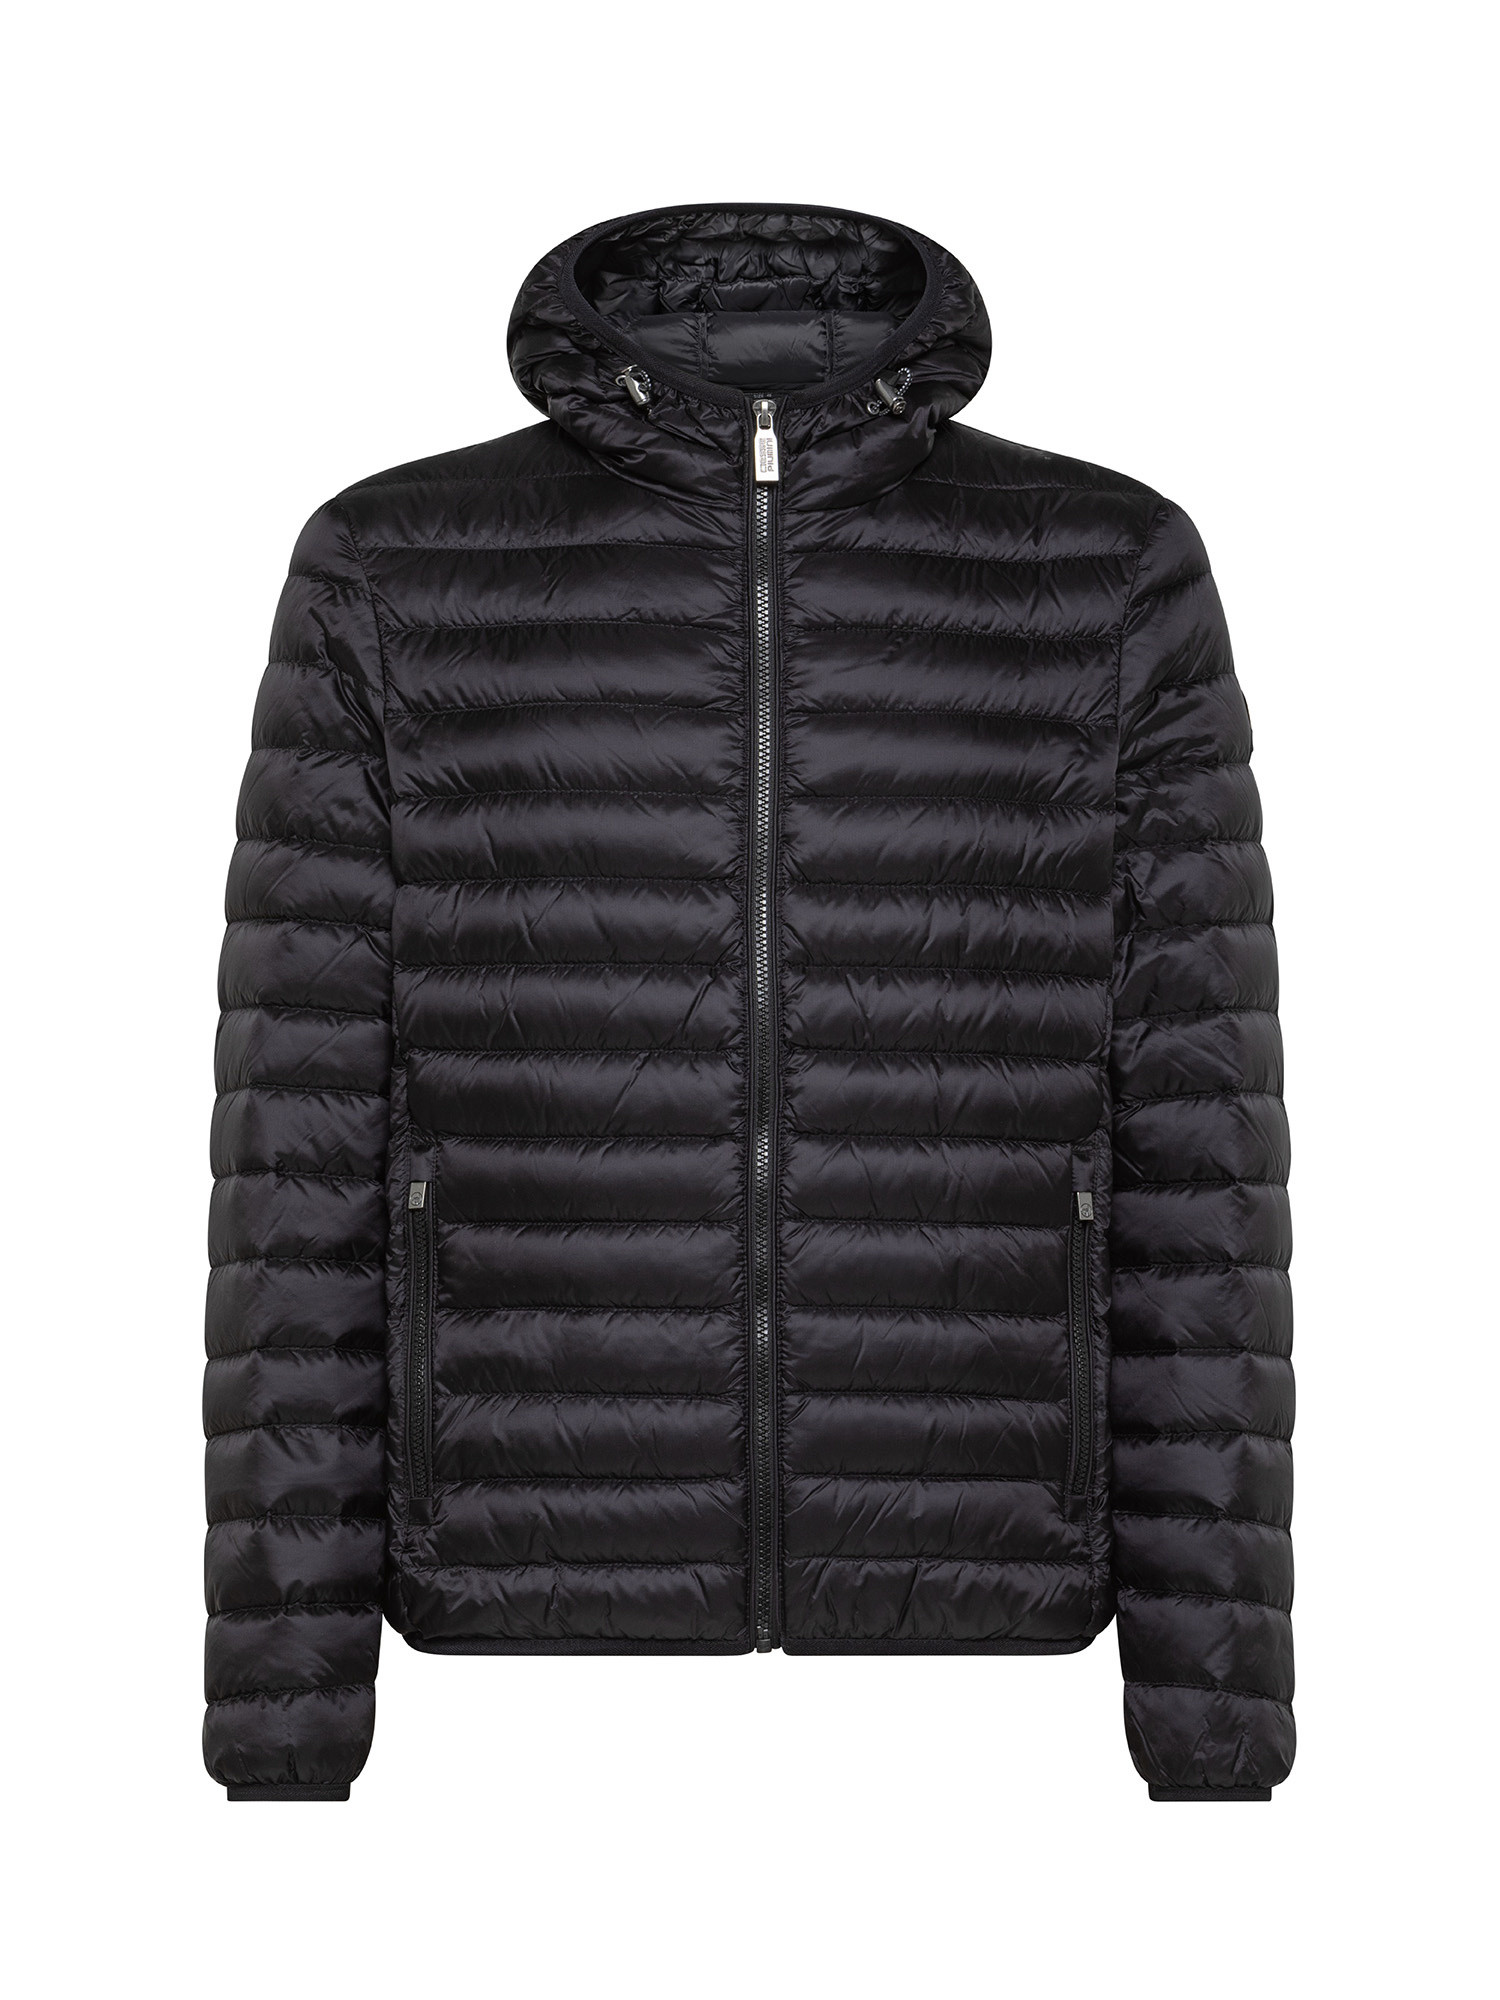 Ciesse Piumini - Down jacket with hood in nylon, Black, large image number 0